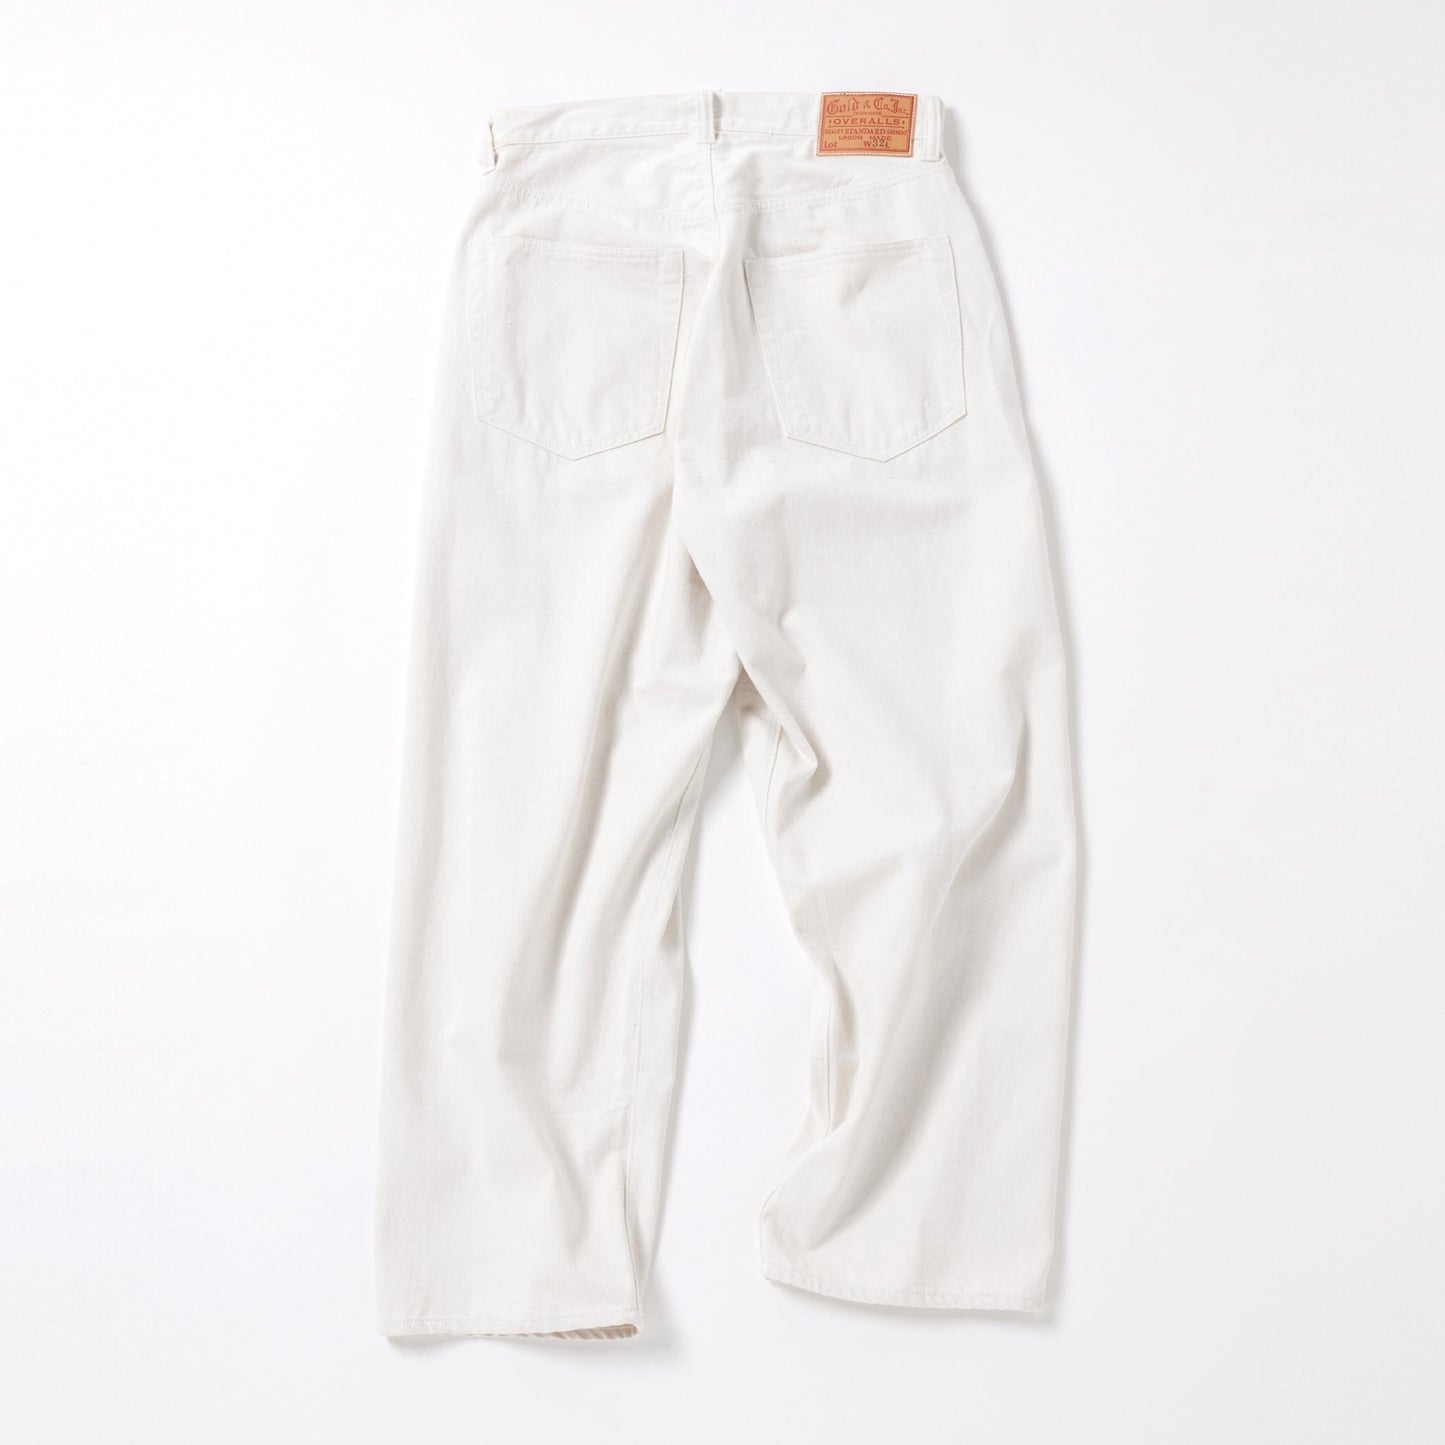 GL42427A / RECYCLED WASTE SUVIN COTTON YARN 11.5oz. DENIM 5POCKET WIDE PANTS